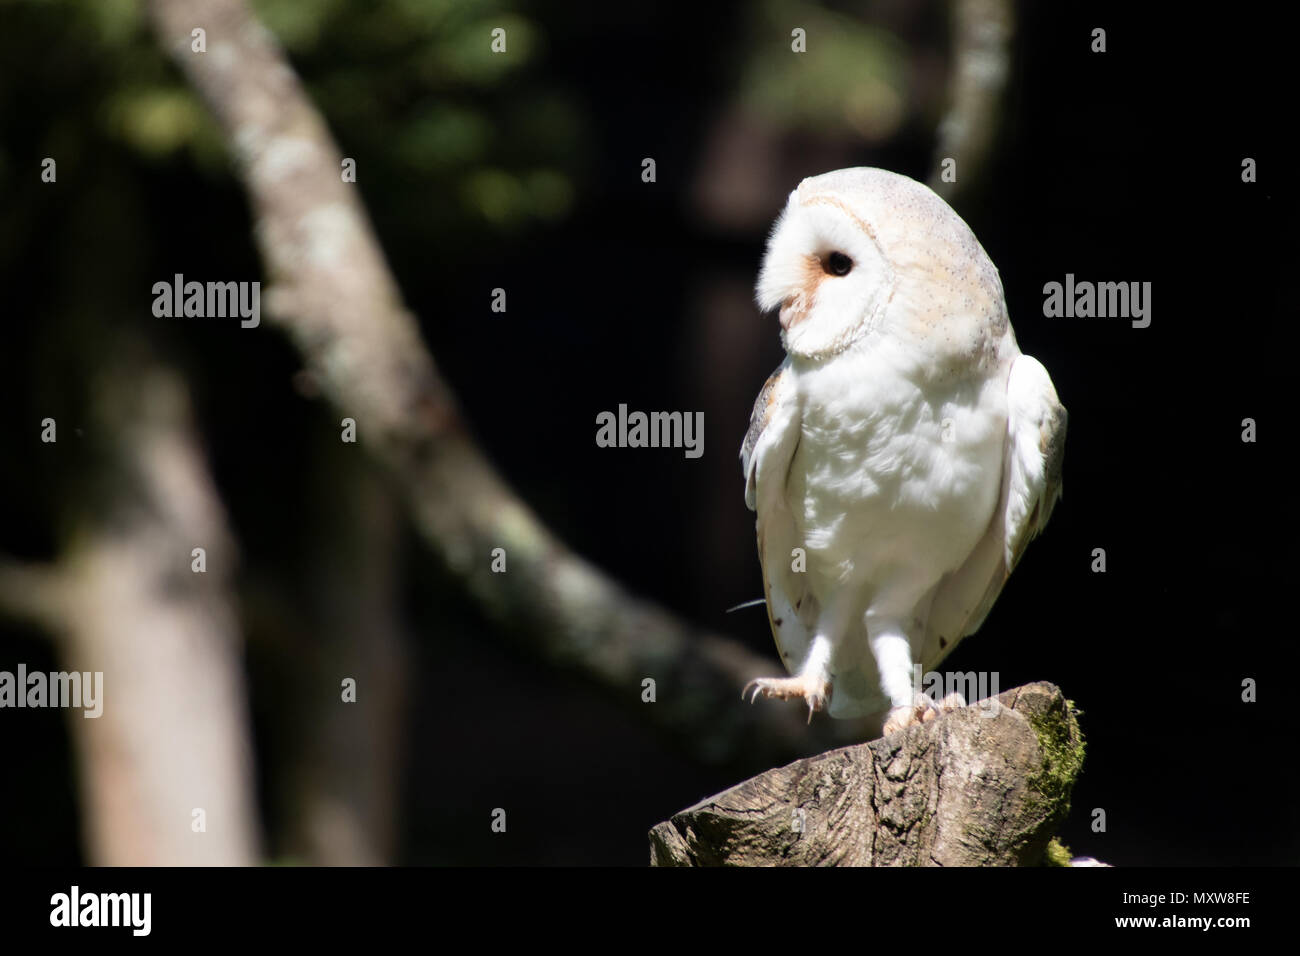 White barn owl (Tytonidae family). one of the two families of owls. Stock Photo